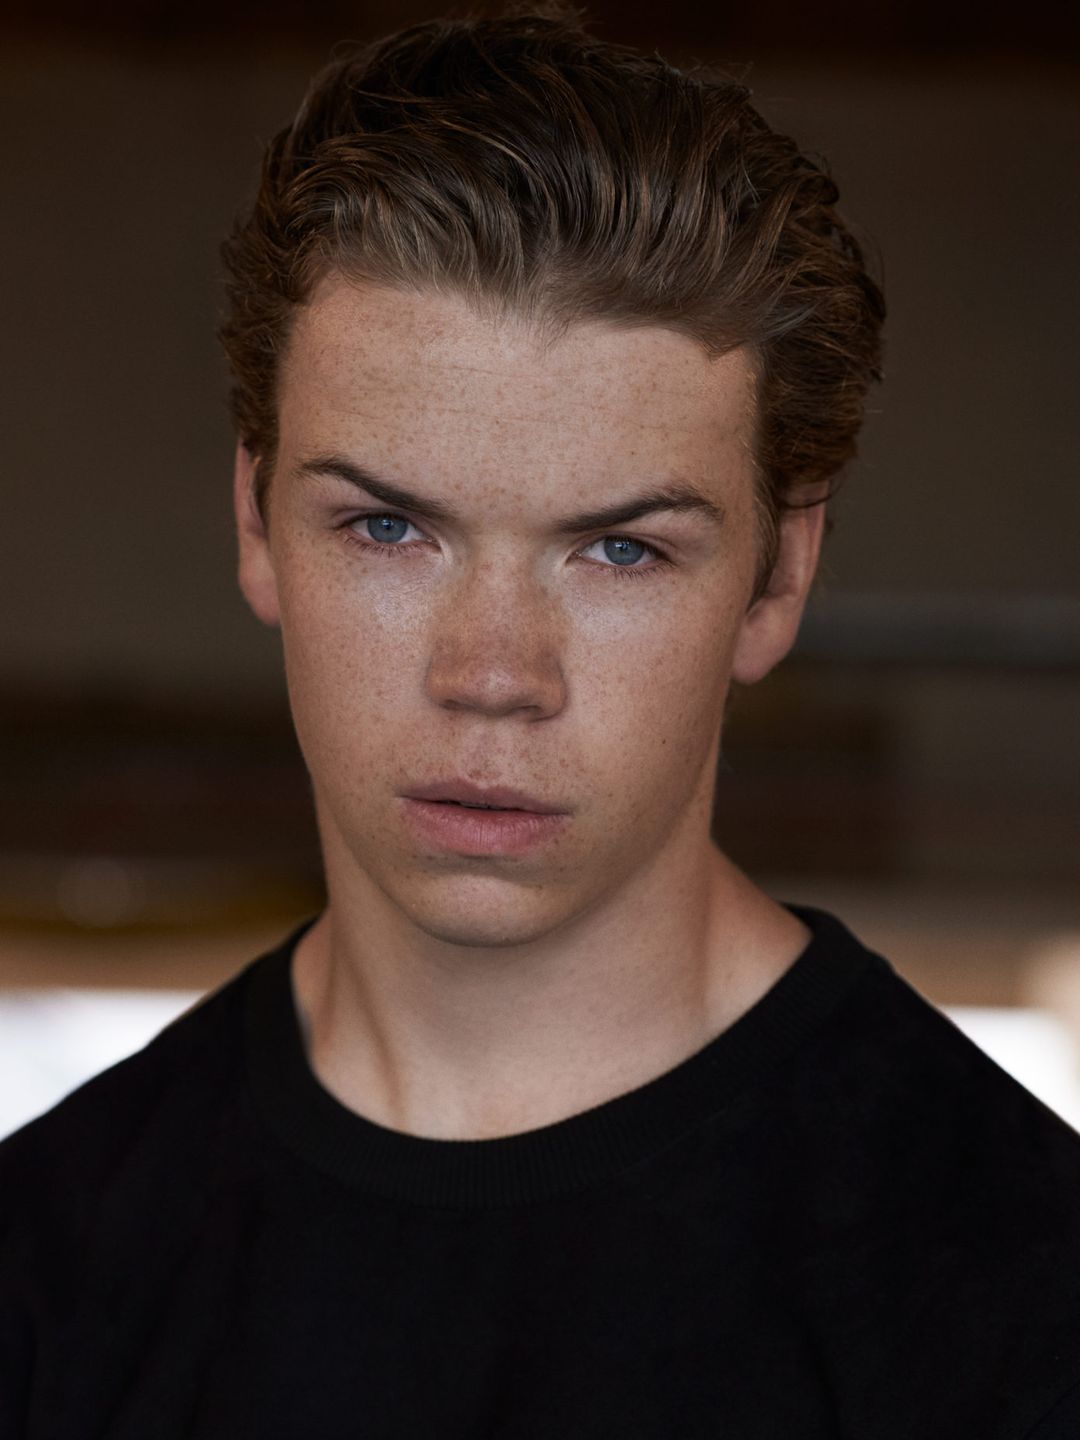 Will Poulter education